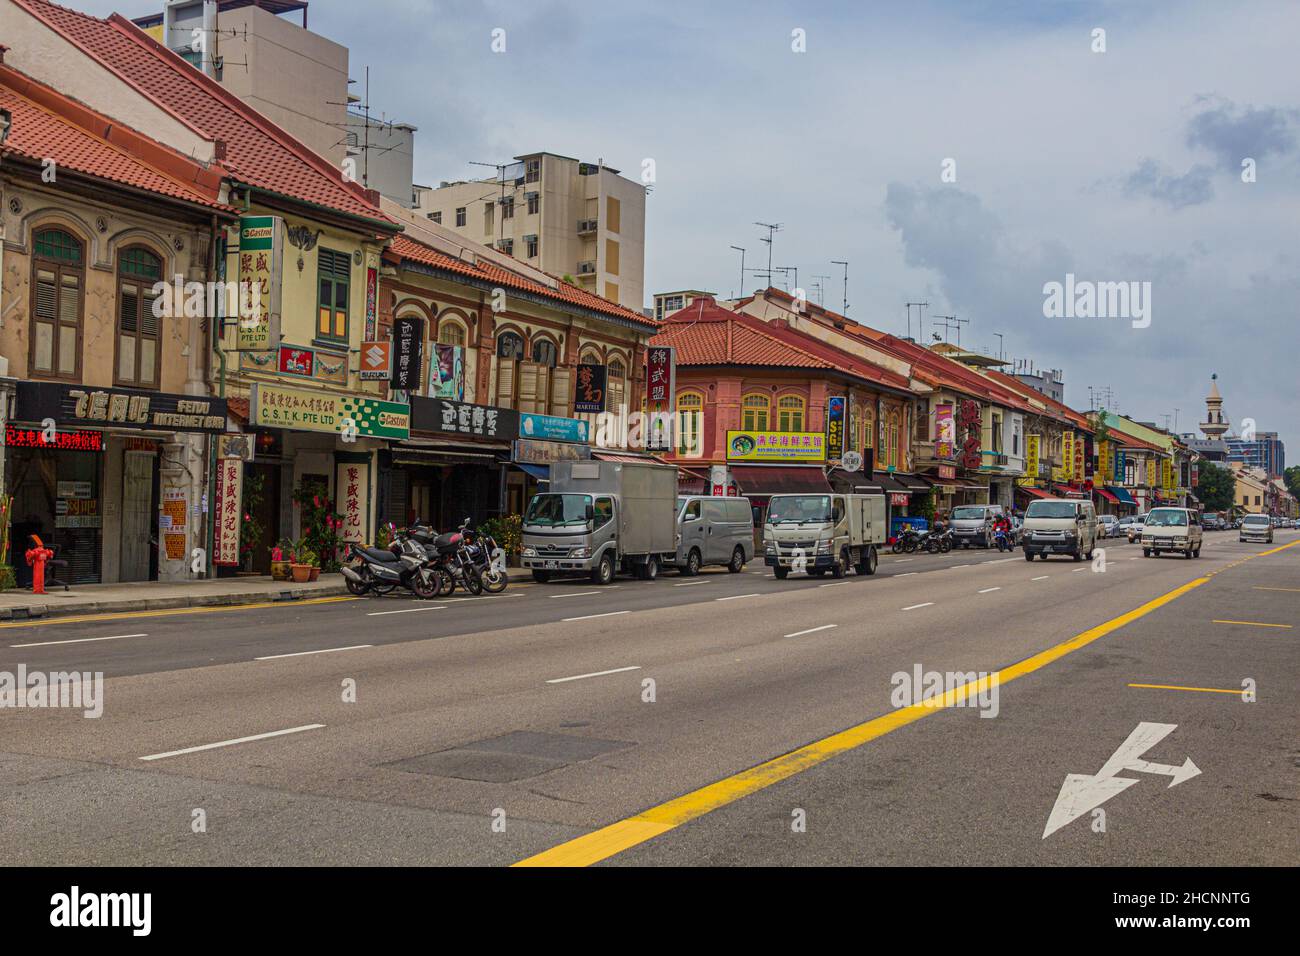 SINGAPORE, SINGAPORE - MARCH 10, 2018: View of Geylang Road in Singapore. Stock Photo